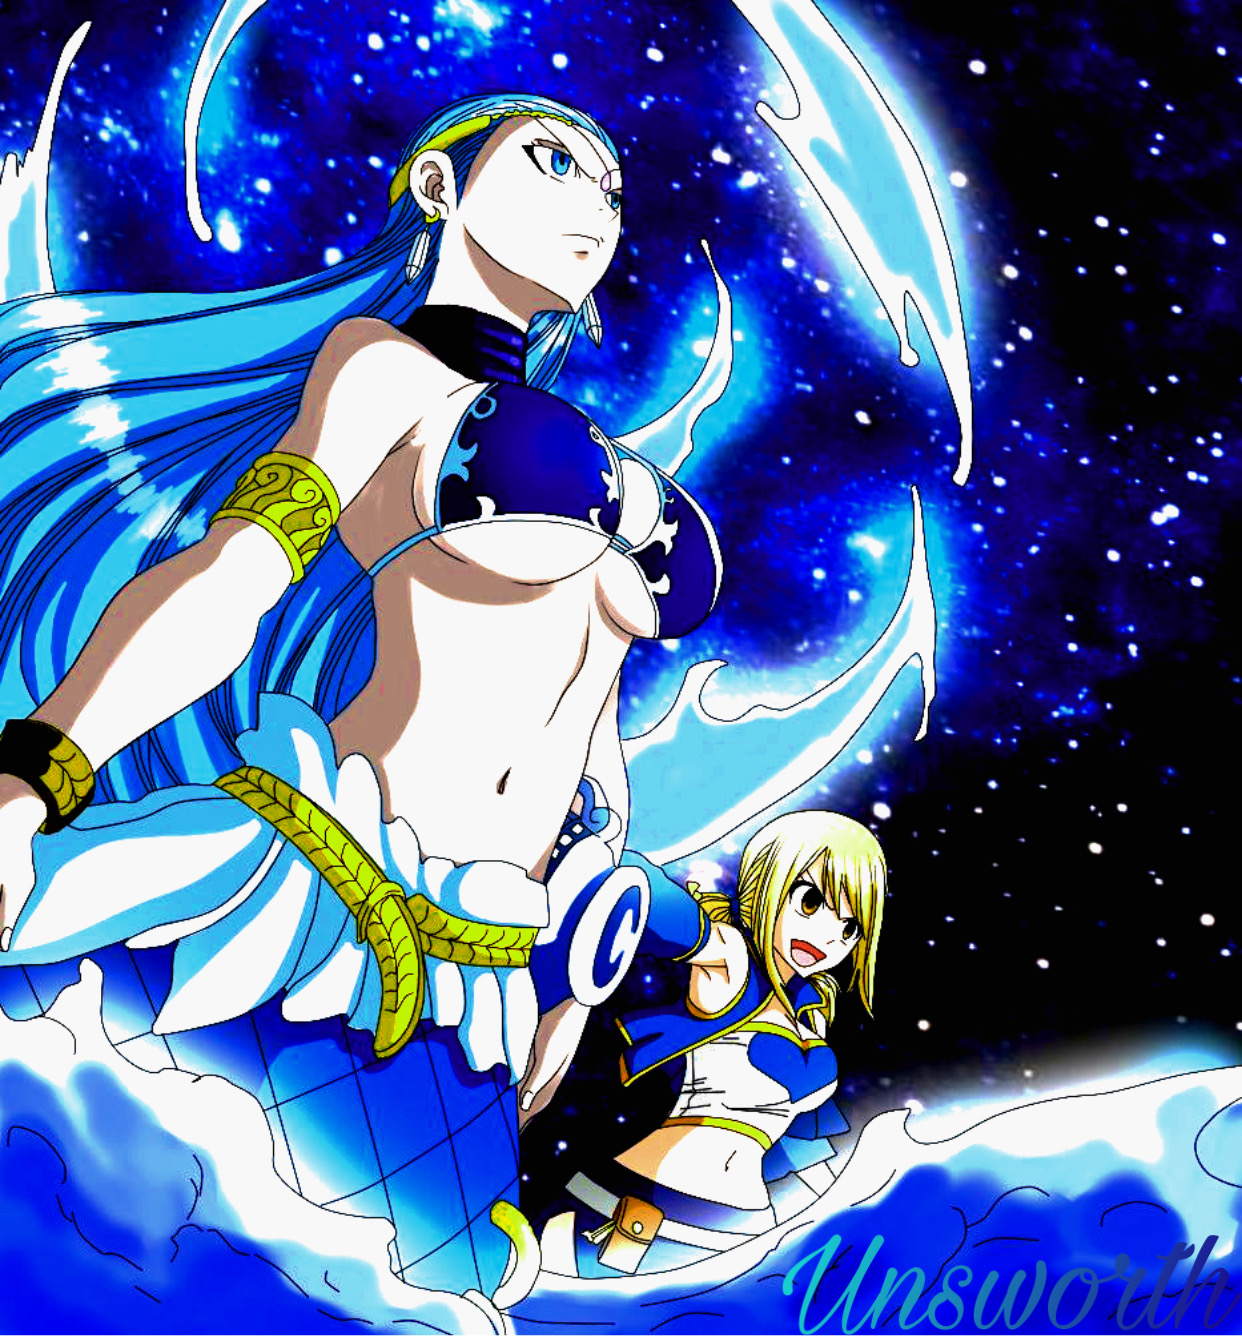 Aquarius And Lucy Heartfilia Fairy Tail By Nightmarexunsworth On Deviantart